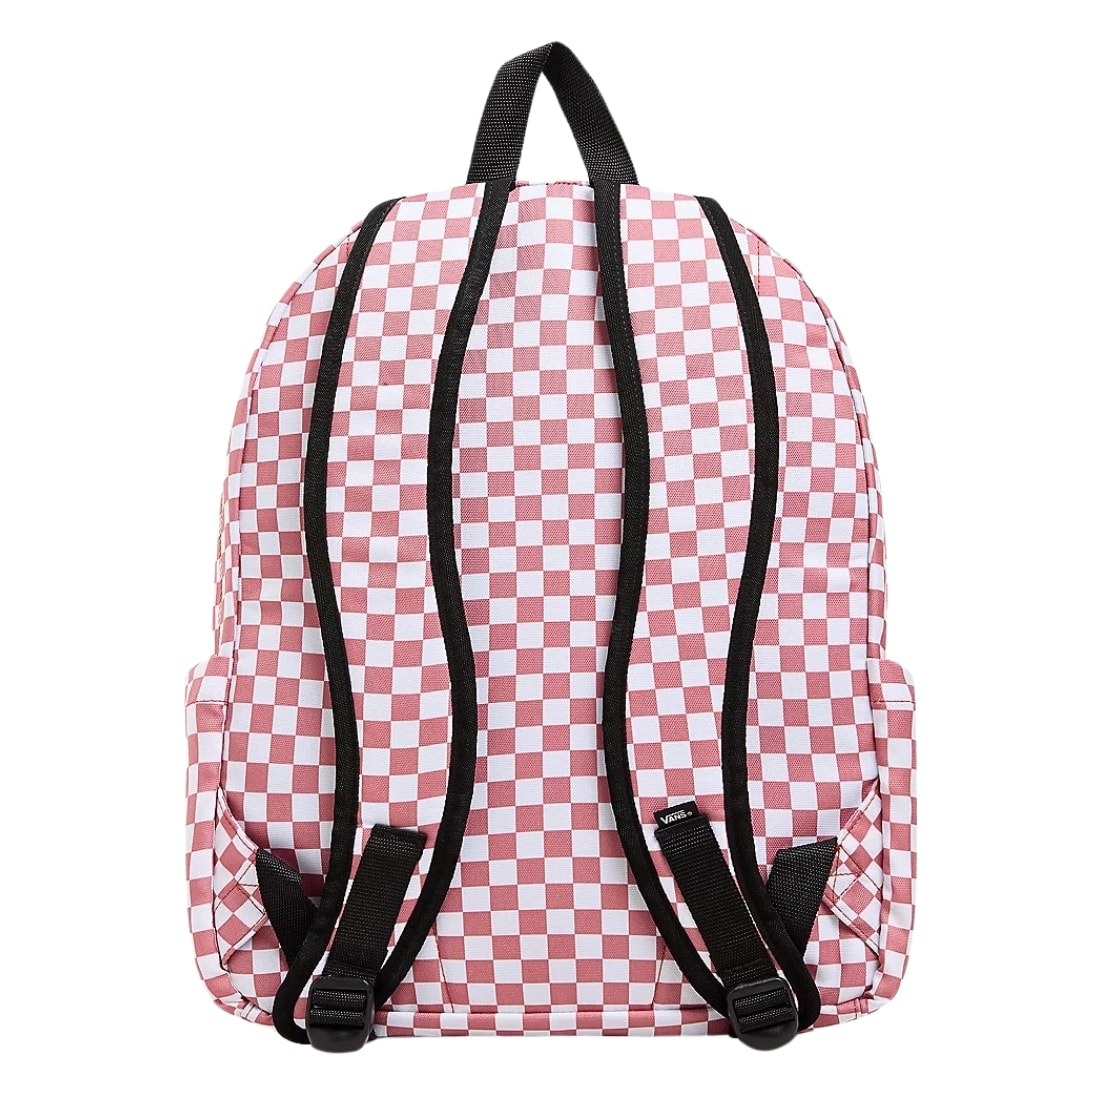 Vans Old Skool Check Backpack - Withered Pink/White - Backpack by Vans One Size